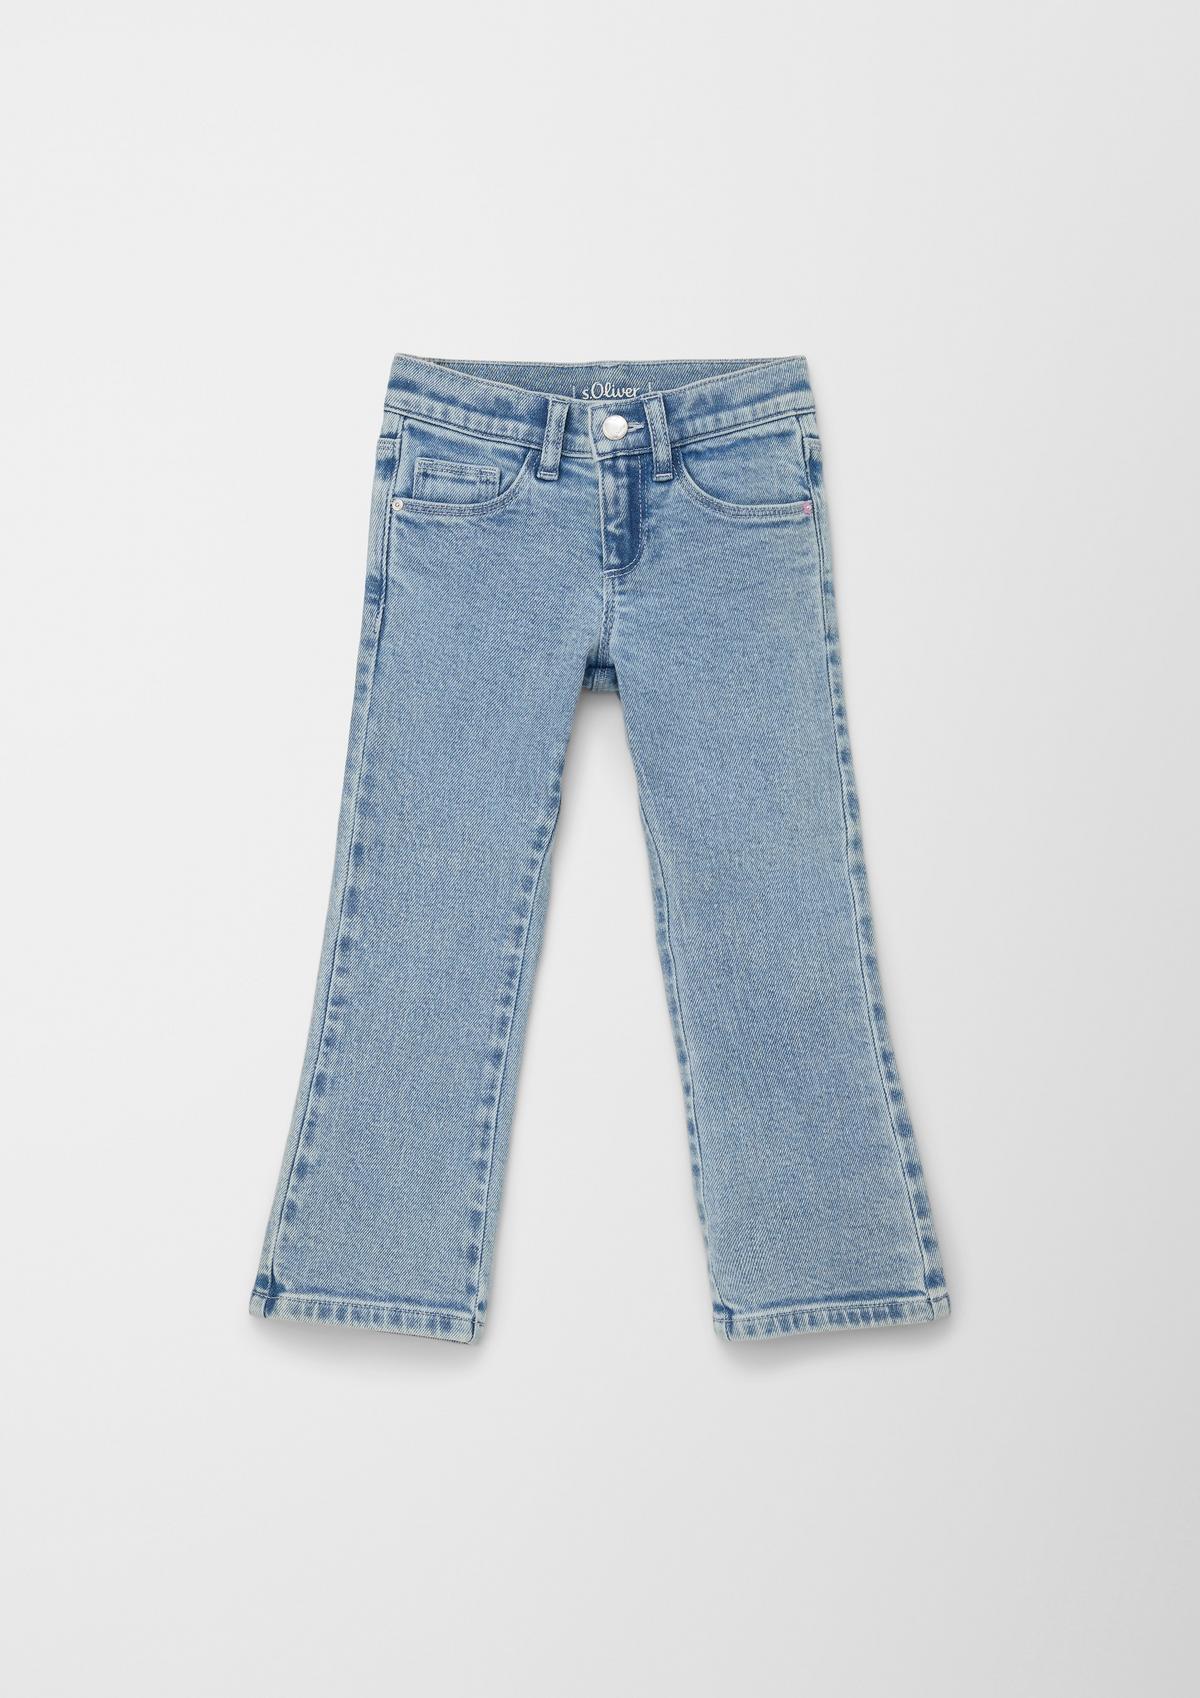 Jeans Betsy / regular fit / mid rise / flared leg